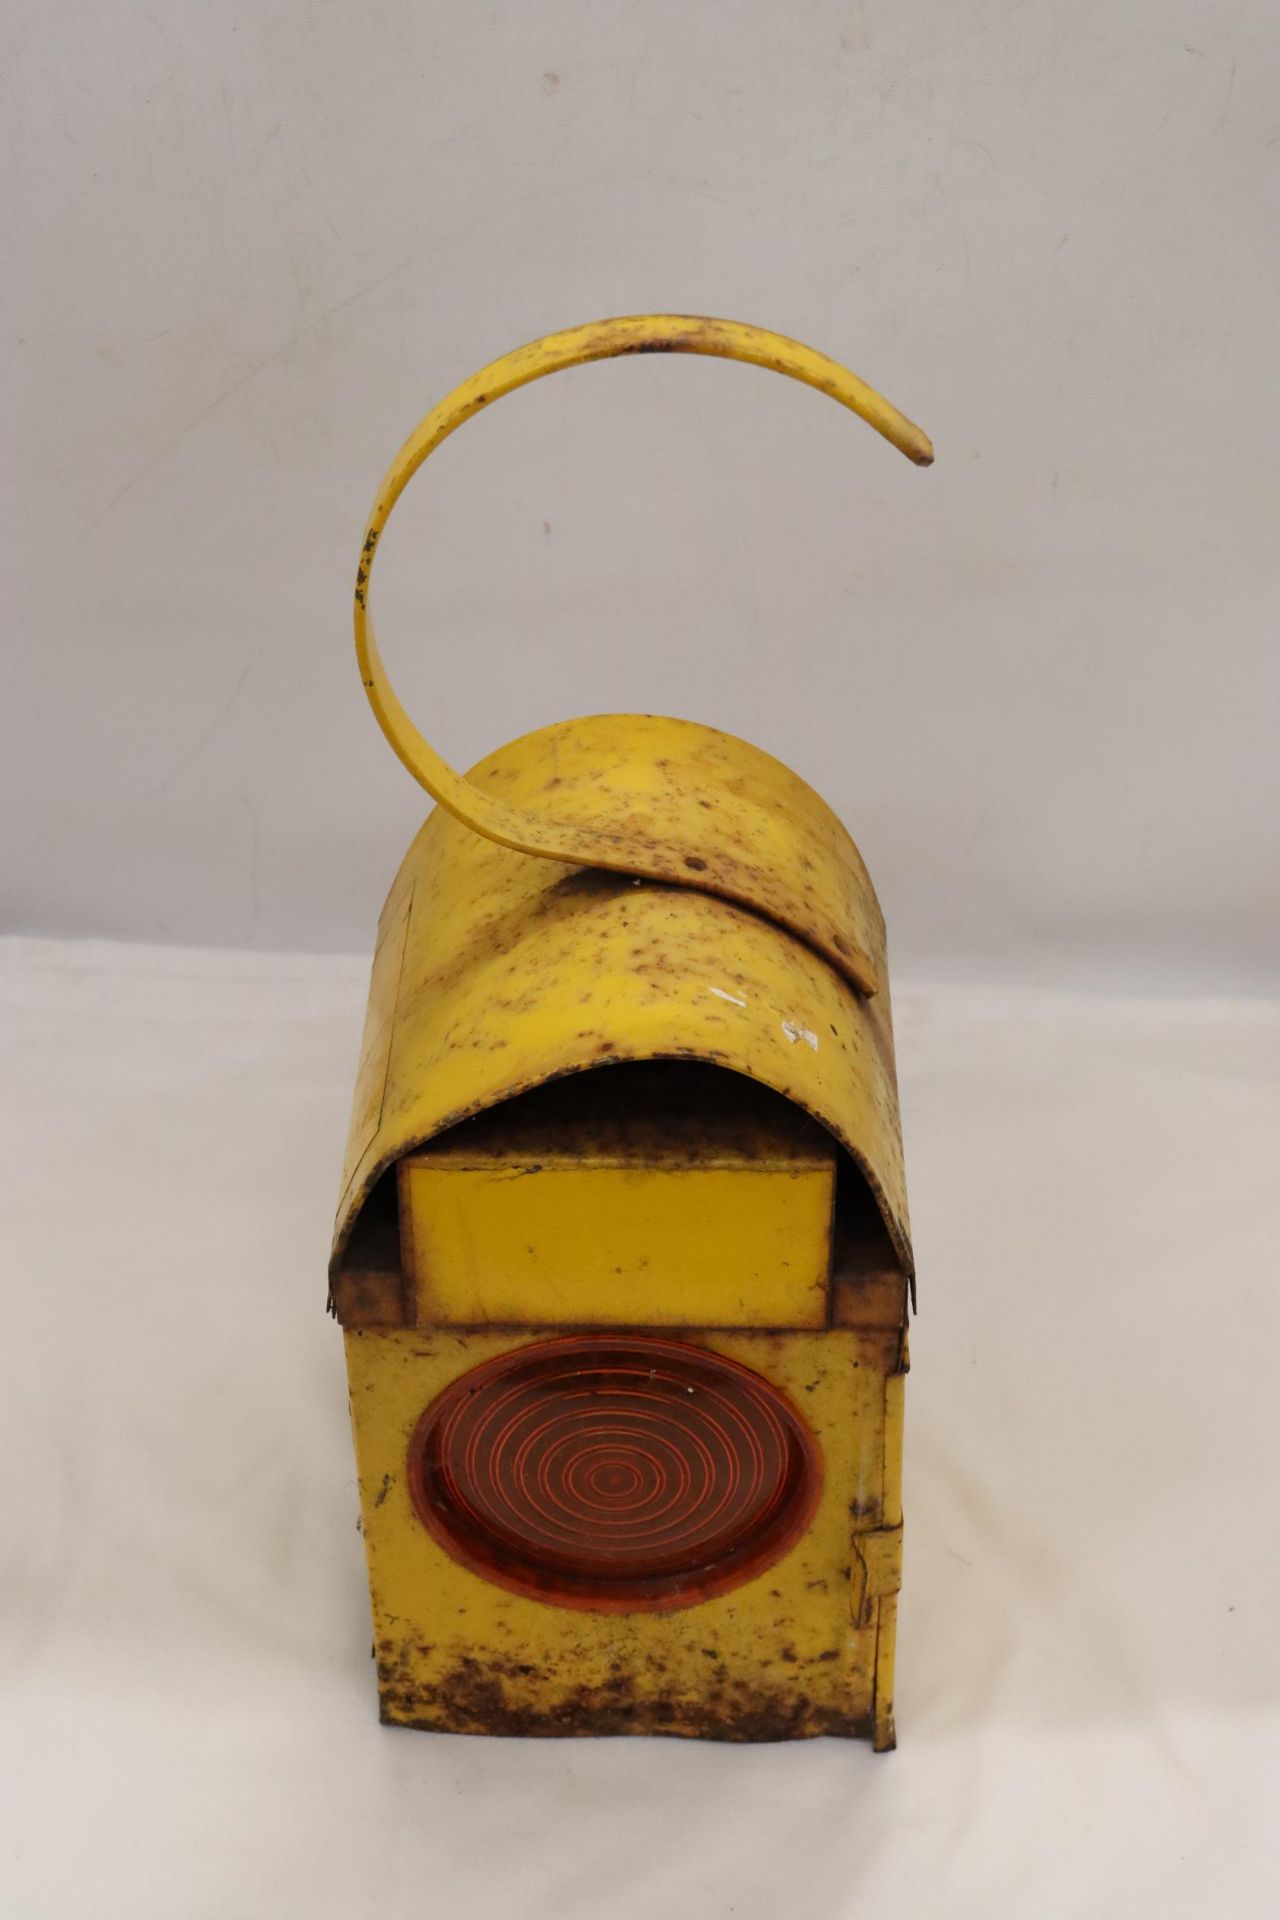 A VINTAGE CHALWYN ROAD/RAIL LAMP - Image 5 of 5